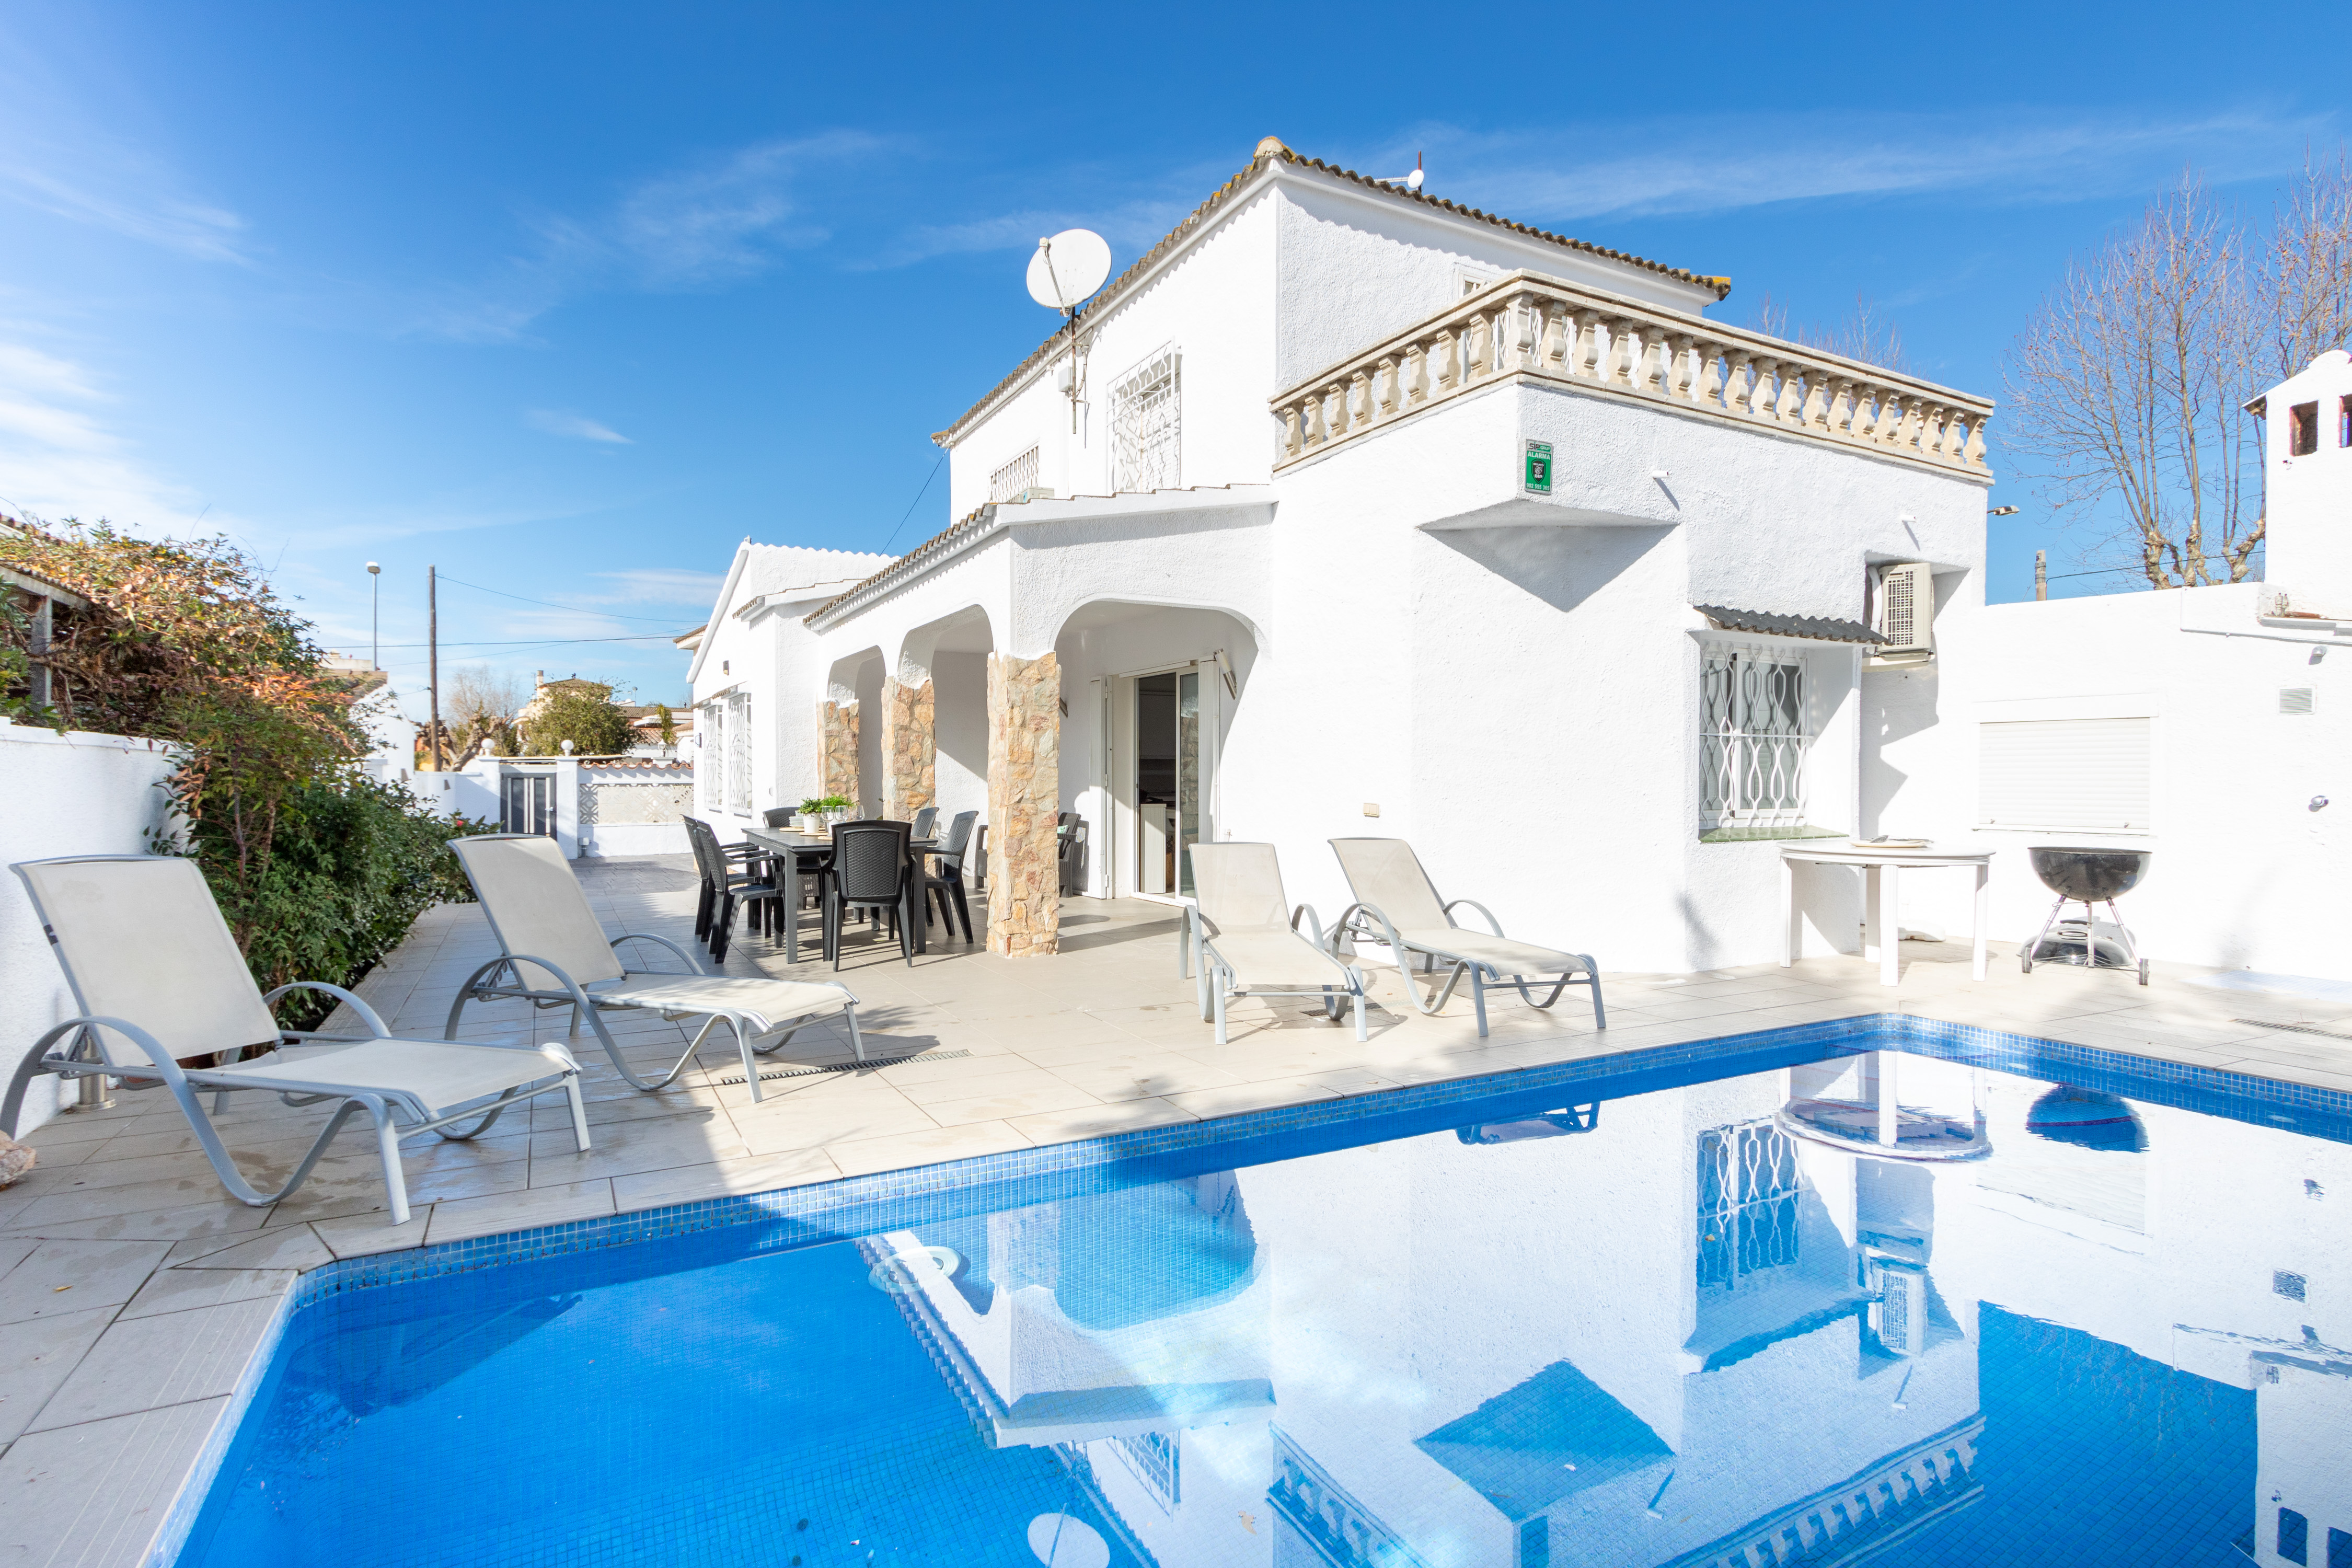 Detached house with pool close to the beach Empuriabrava